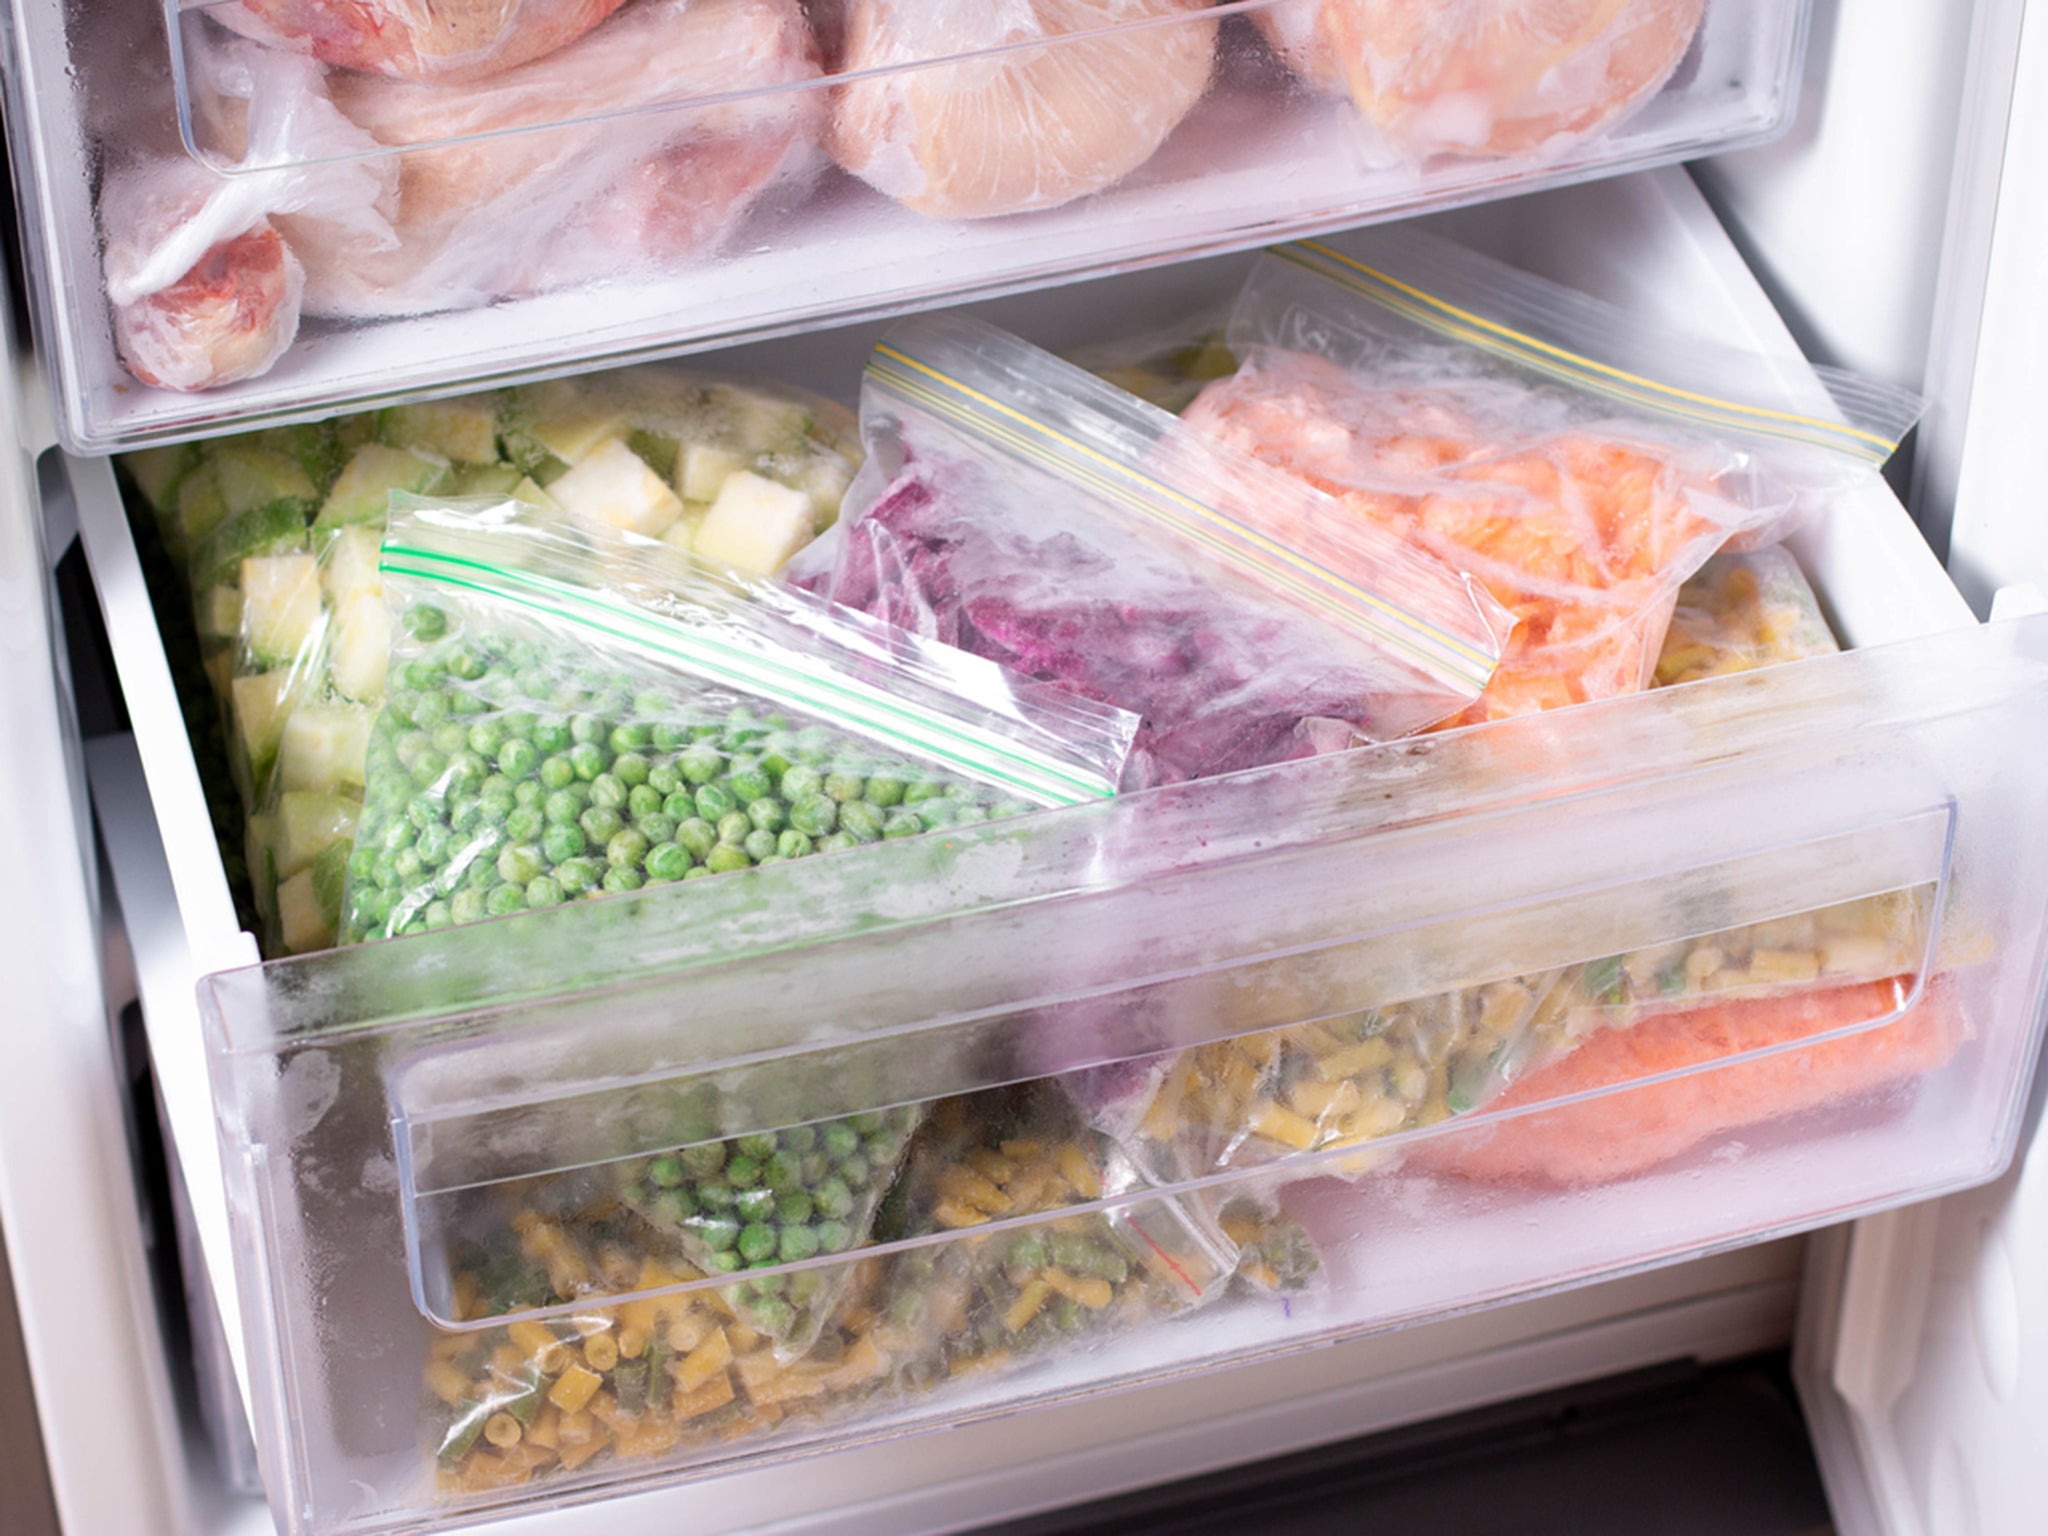 Making use of the freezer now will ensure you’re ahead of time for the big day